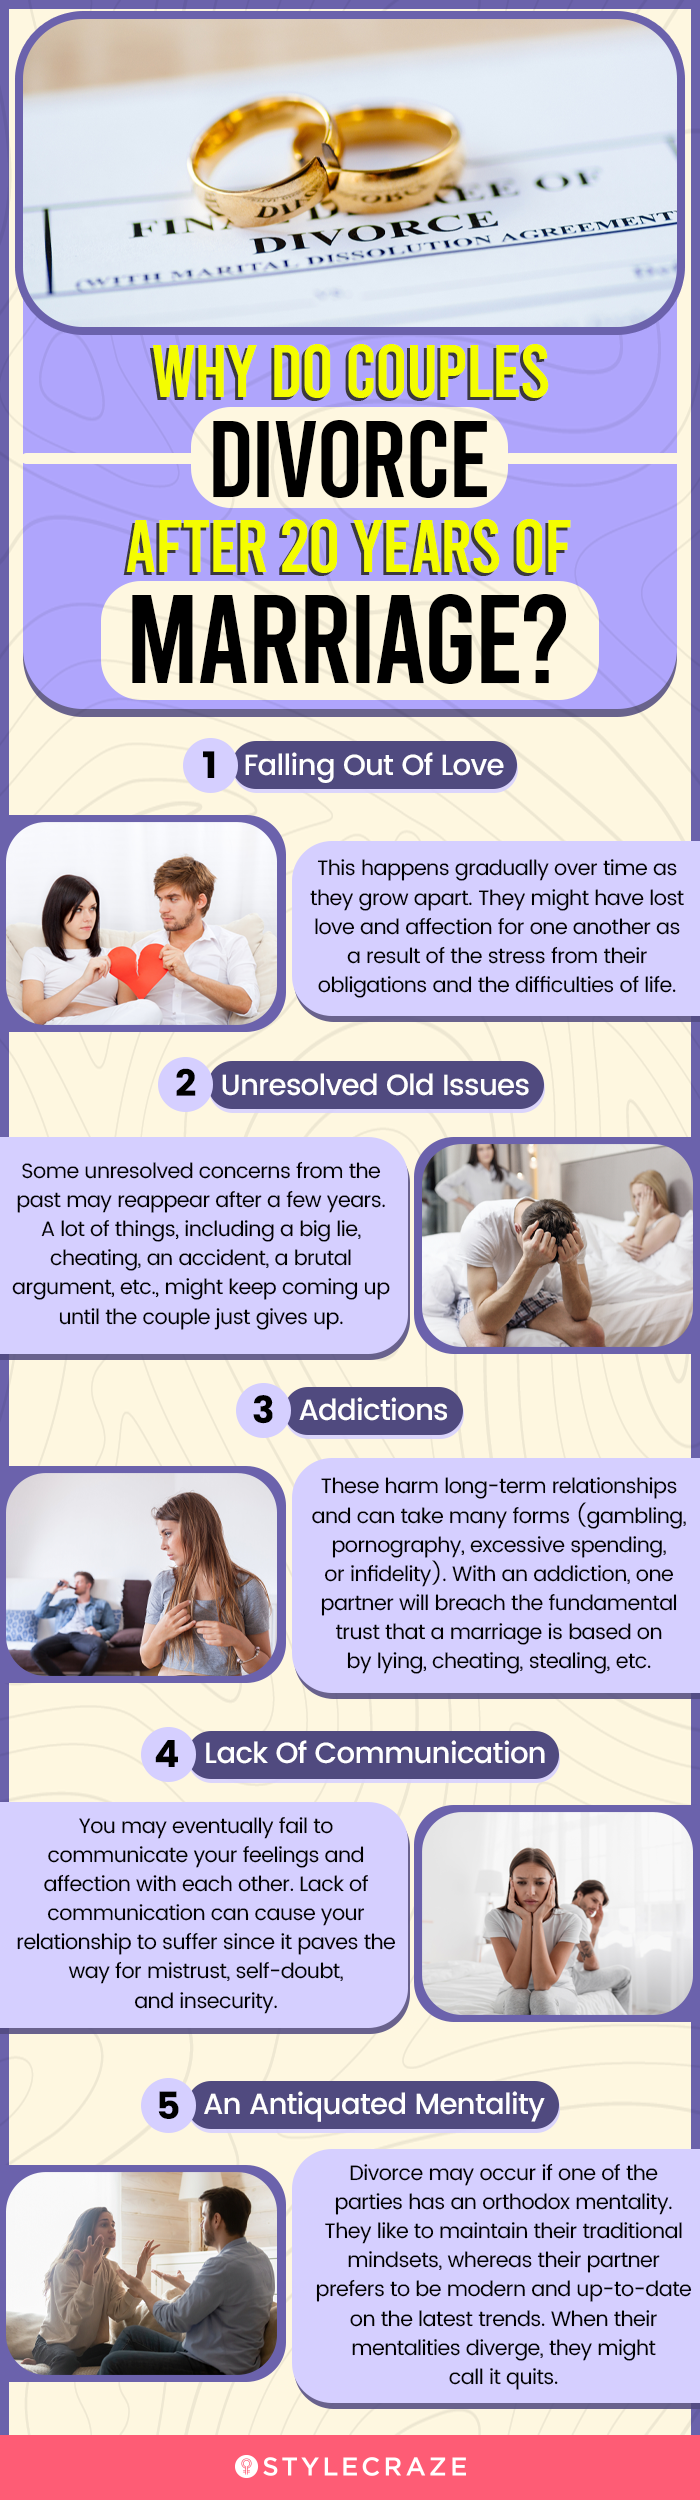 why do couples divorce after 20 years of marriage (infographic)